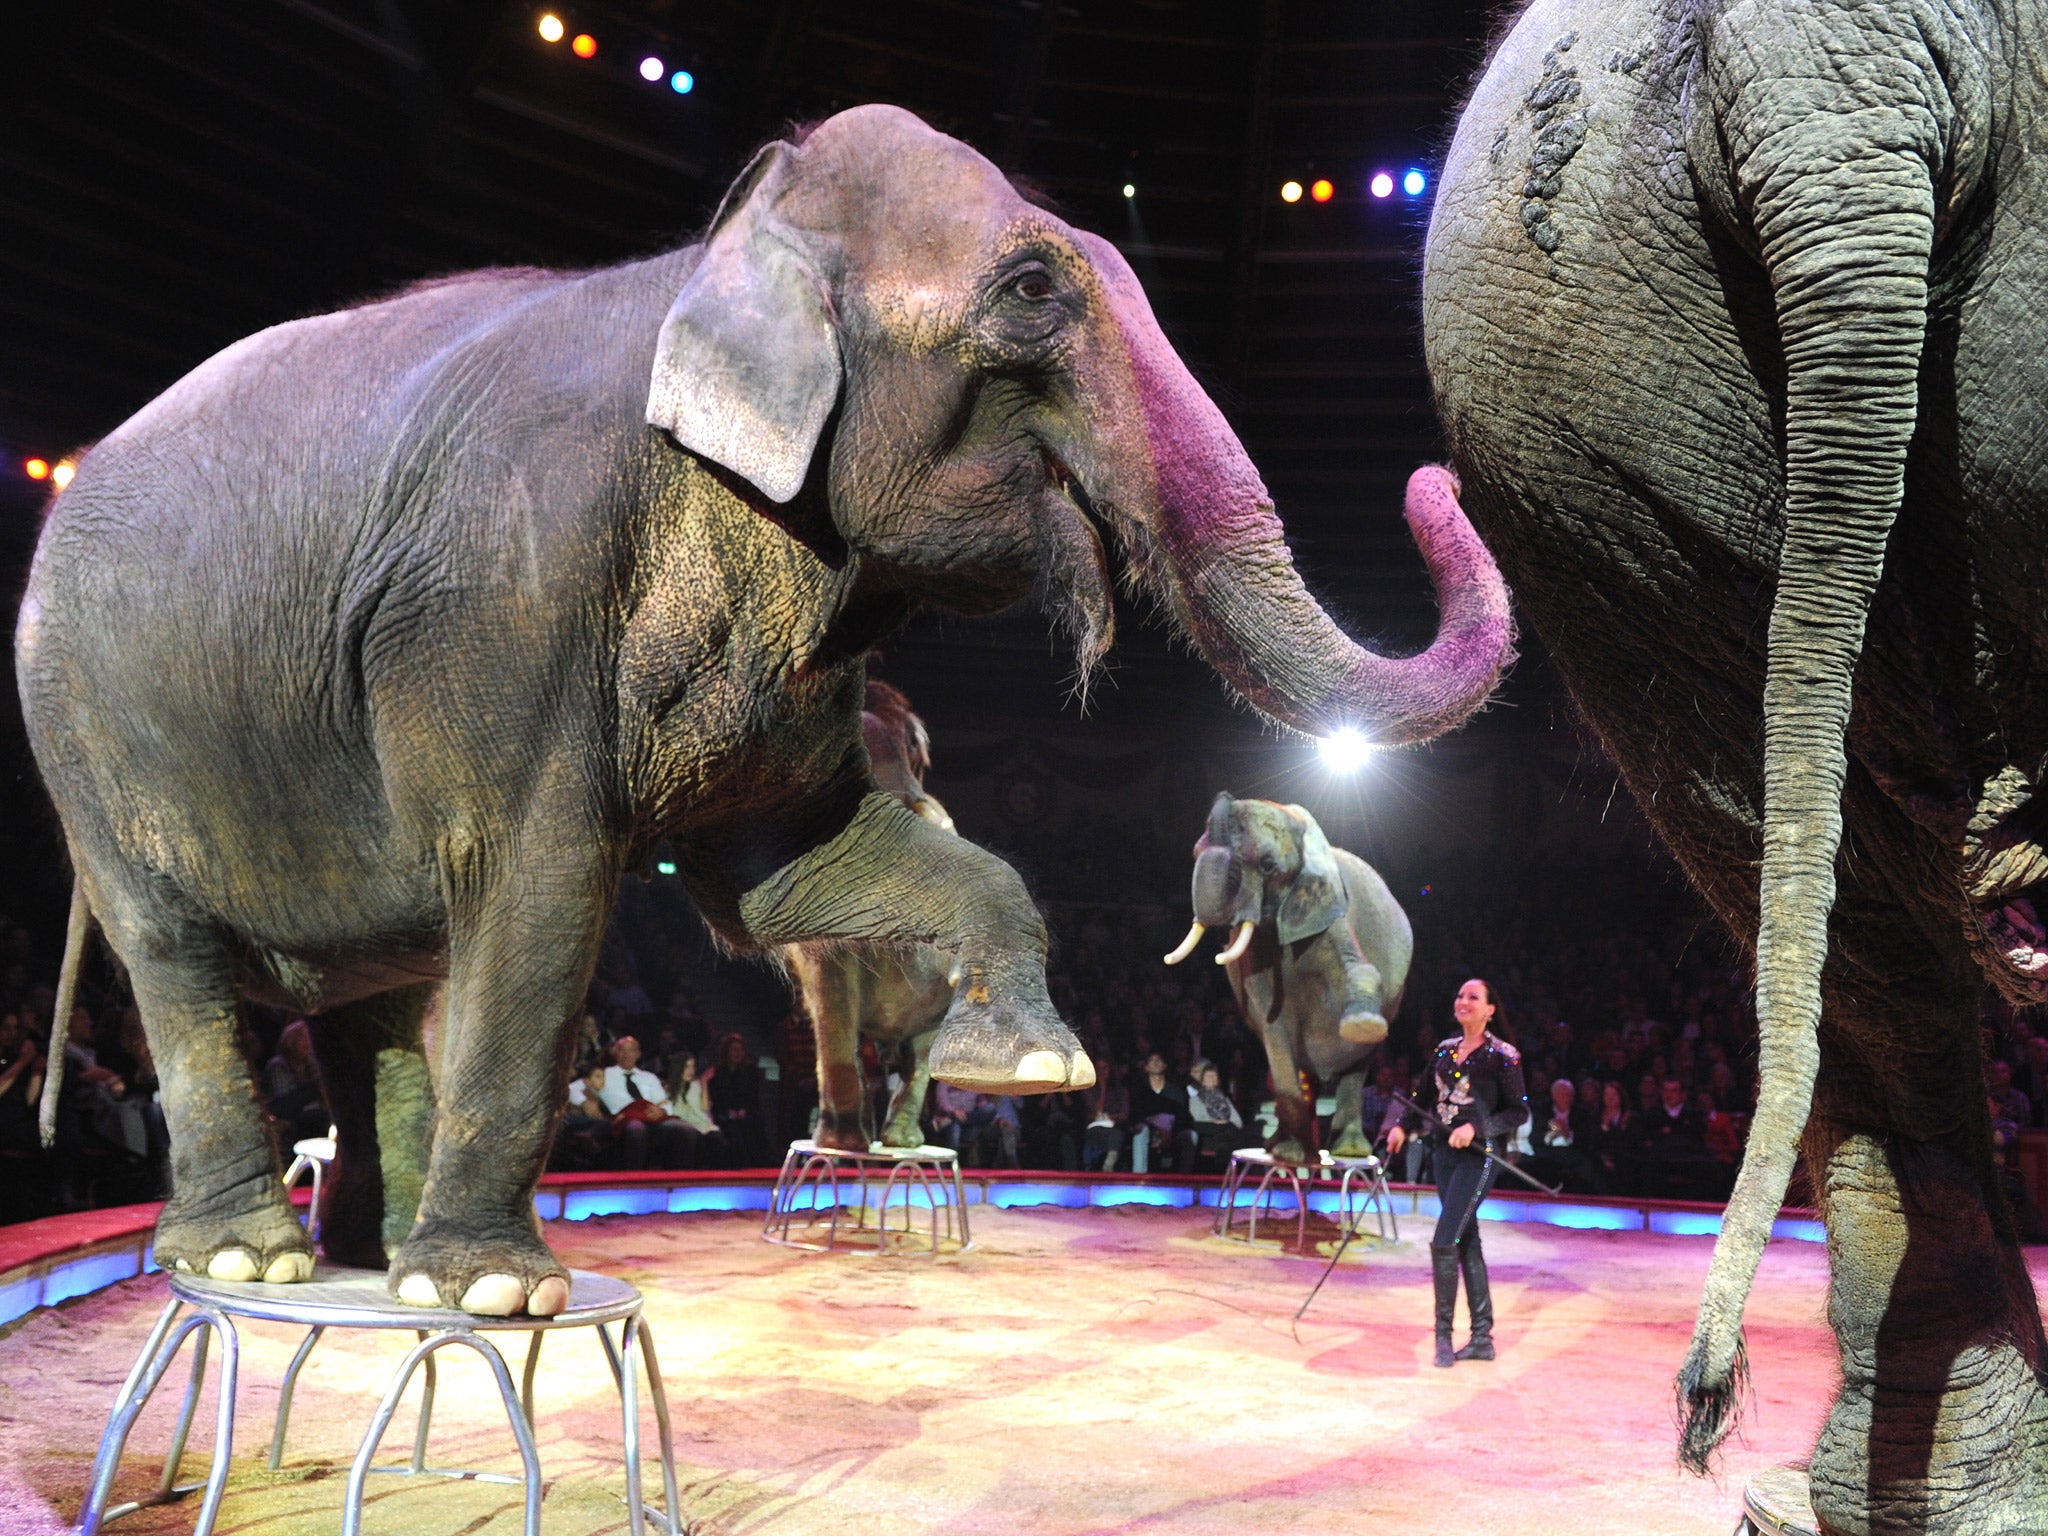 Elephants on stage during a circus performance in Germany